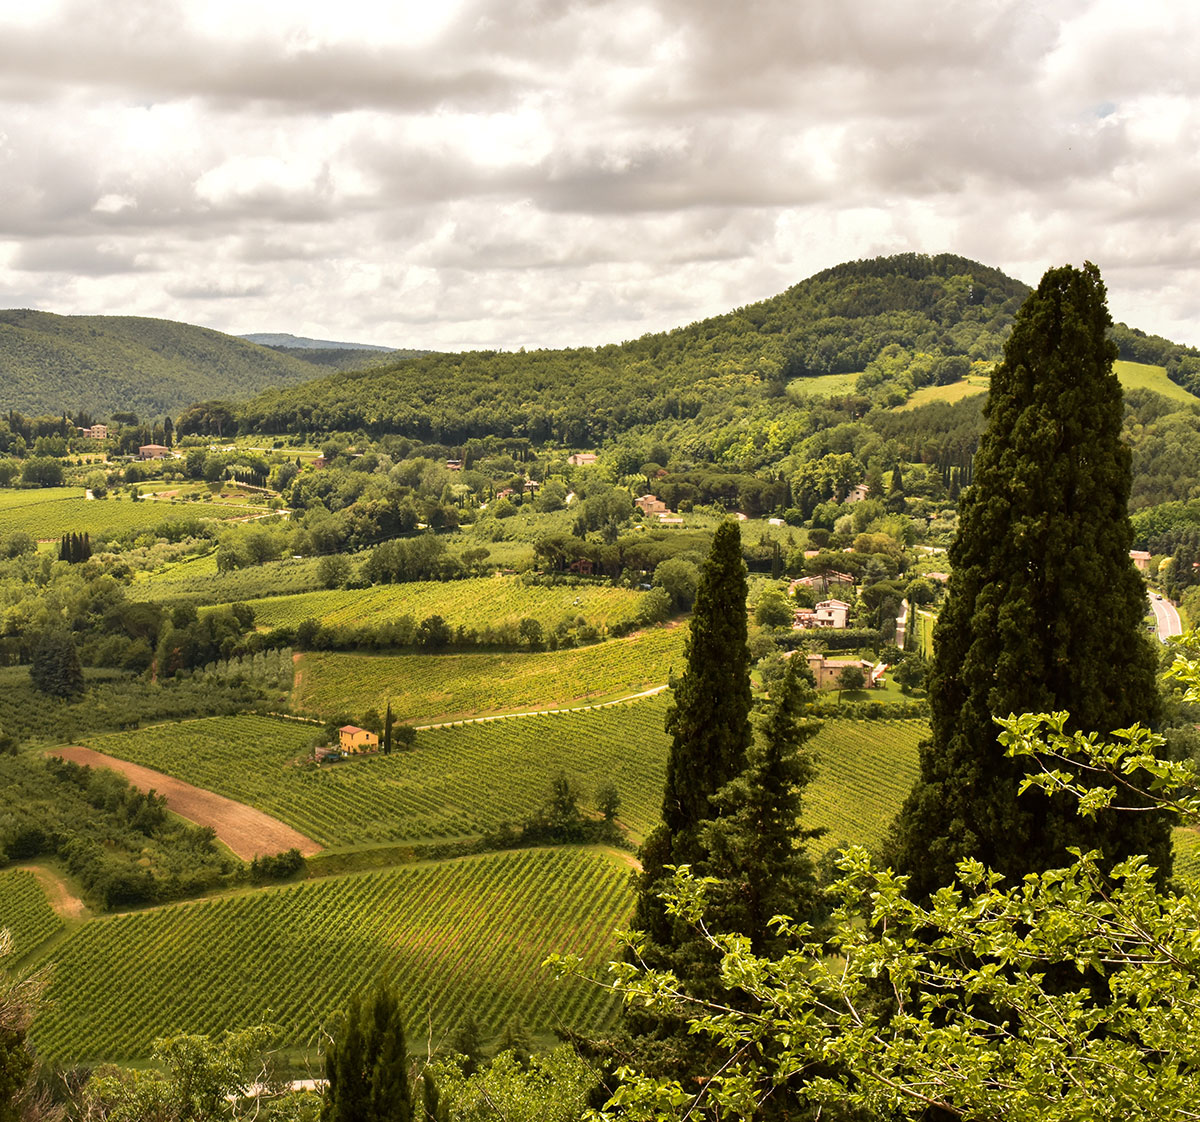 Sprawling vineyards among the rolling hills of the Tuscany wine region in Italy.